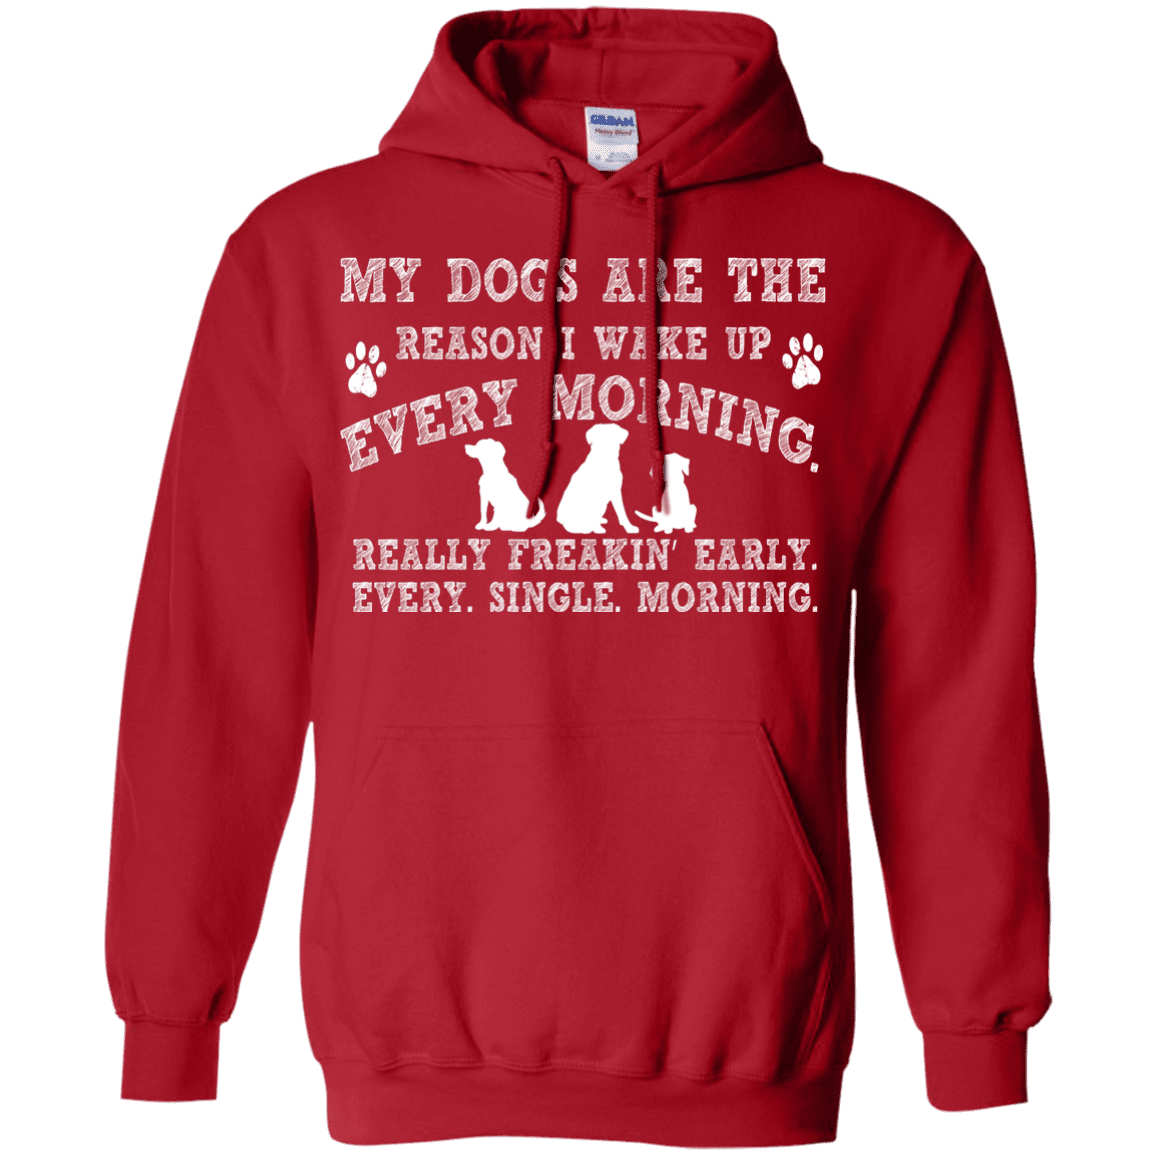 My Dogs Are The Reason - Hoodie.